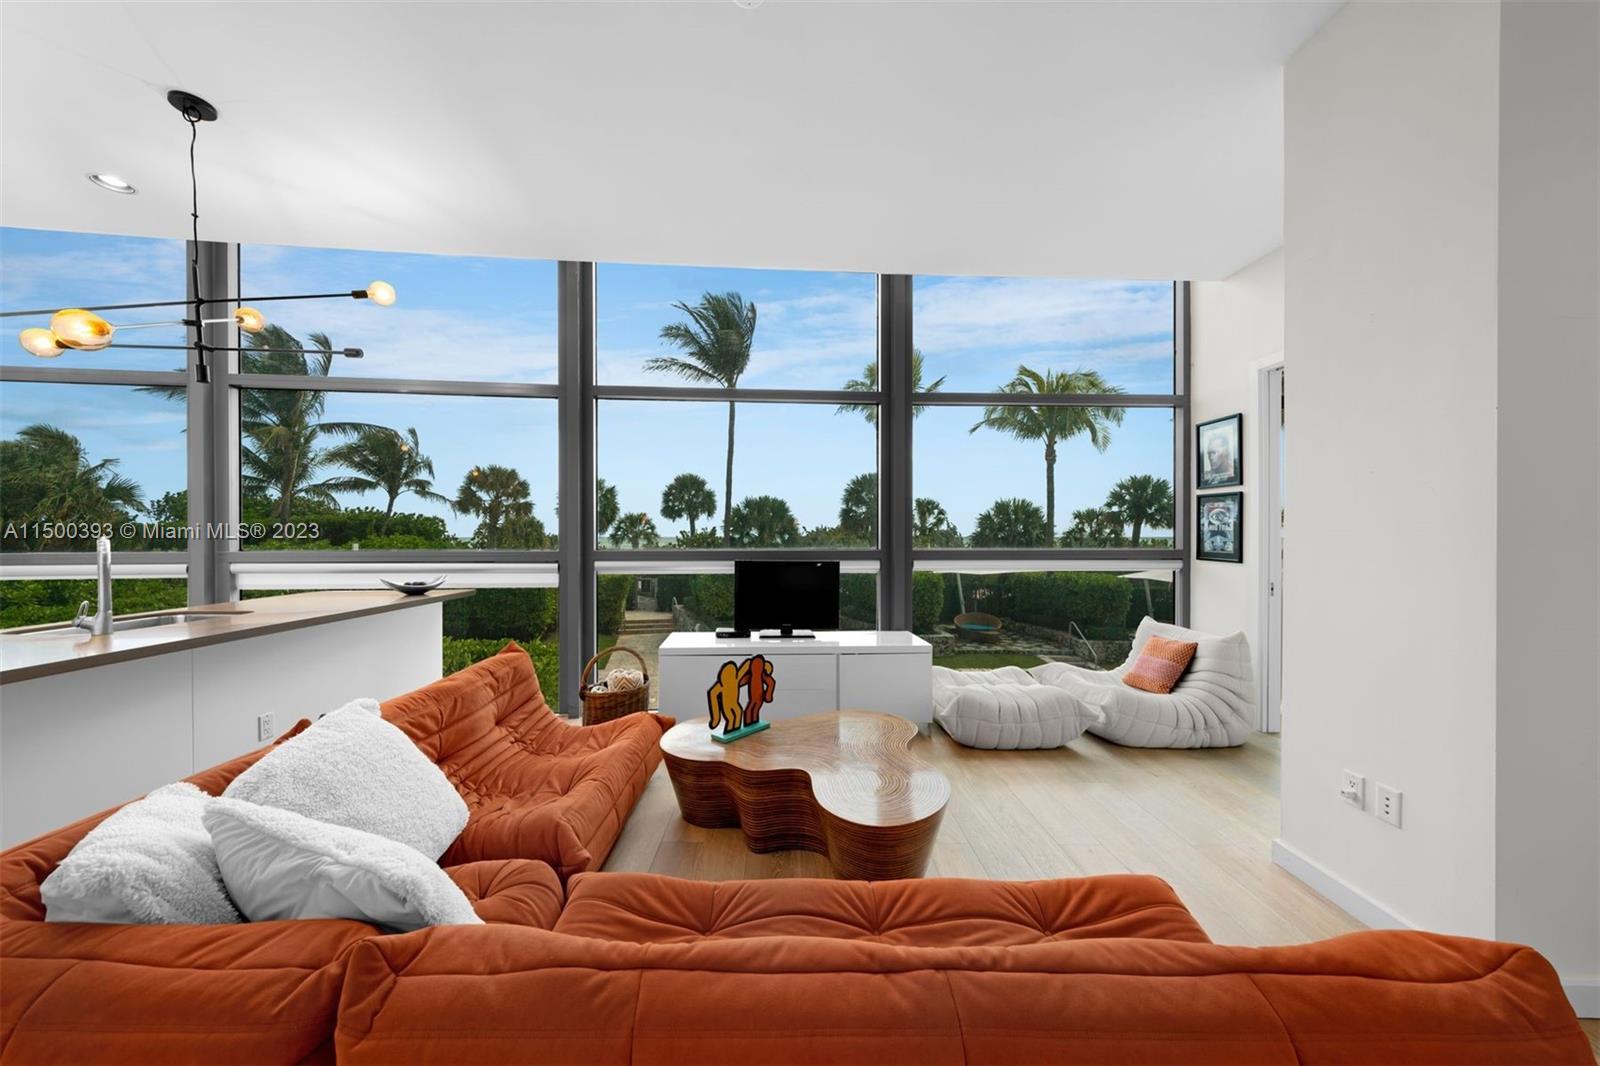 This stunning 1 Bed, 1.5 Bath unit offers floor to ceiling windows, an updated kitchen, hardwood floors, direct ocean views and a small sized den that could be used as an office. The MEi is a boutique condominium with 134 residences, offering 5-star service, valet parking, beach access + service, a state-of-the-art pool, fitness center, library, steam room, spa, and more. Available ASAP. Comes with Private rooftop terrace with gorgeous ocean views!